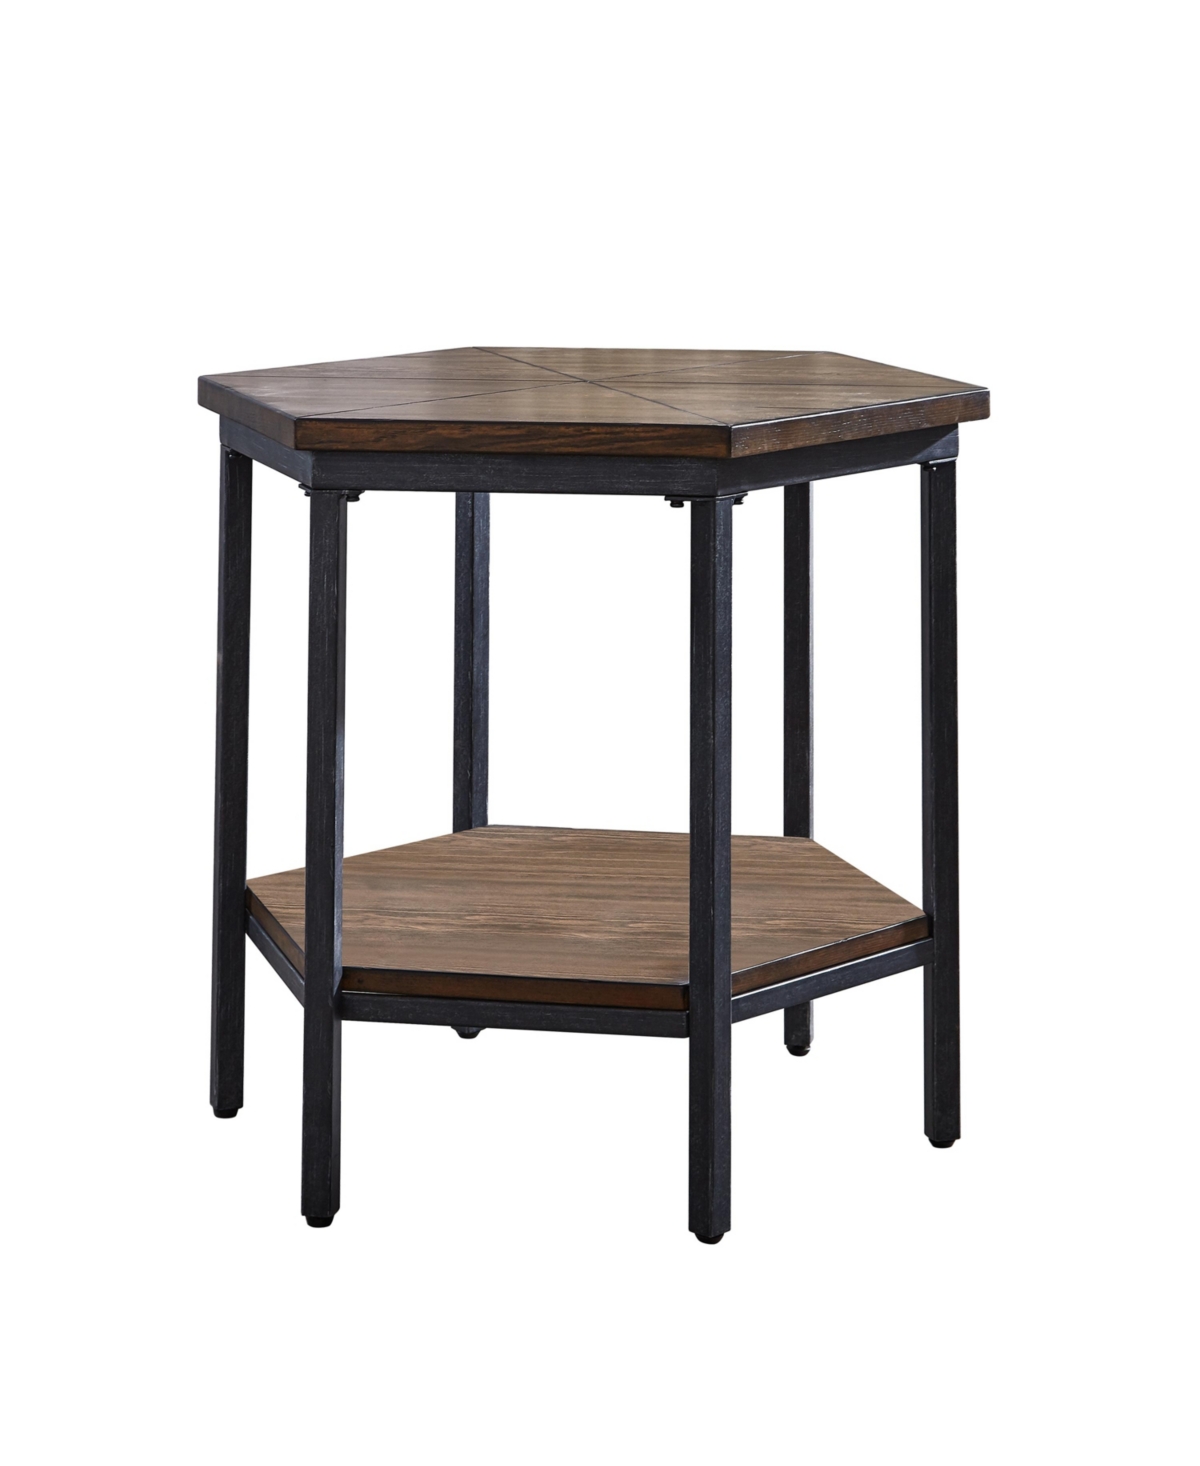 Steve Silver Ultimo 24" Hexagonal Wood And Iron End Table In Mocha